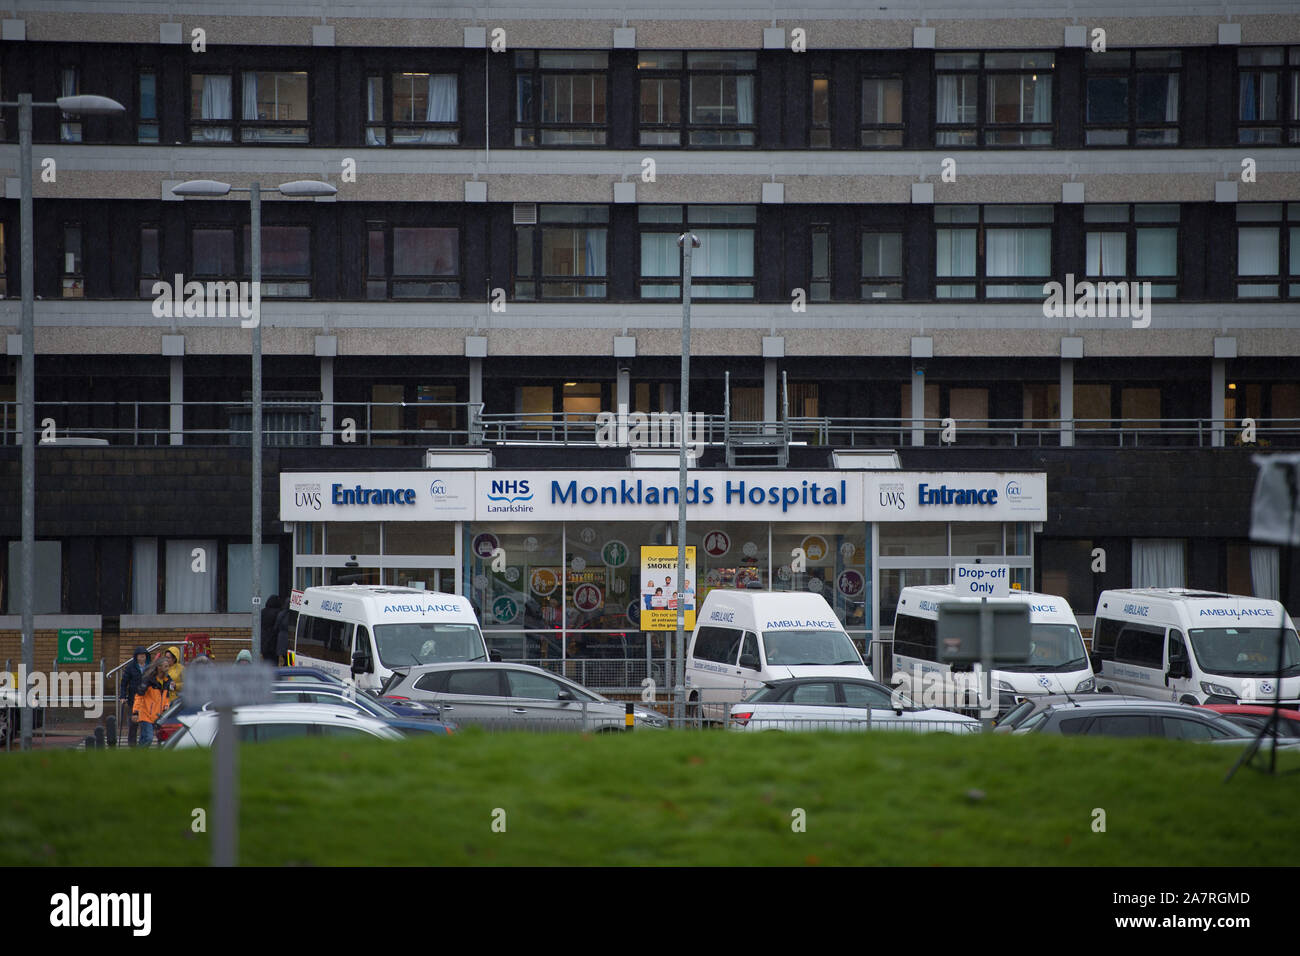 Glasgow, UK. 4 November 2019. Pictured: Monklands Hospital, Airdrie. Scottish Labour leader Richard Leonard joins Helen McFarlane, candidate for the Airdrie and Shotts constituency, at Monklands Hospital to highlight the SNP’s broken promises on the NHS. Credit: Colin Fisher/Alamy Live News Stock Photo